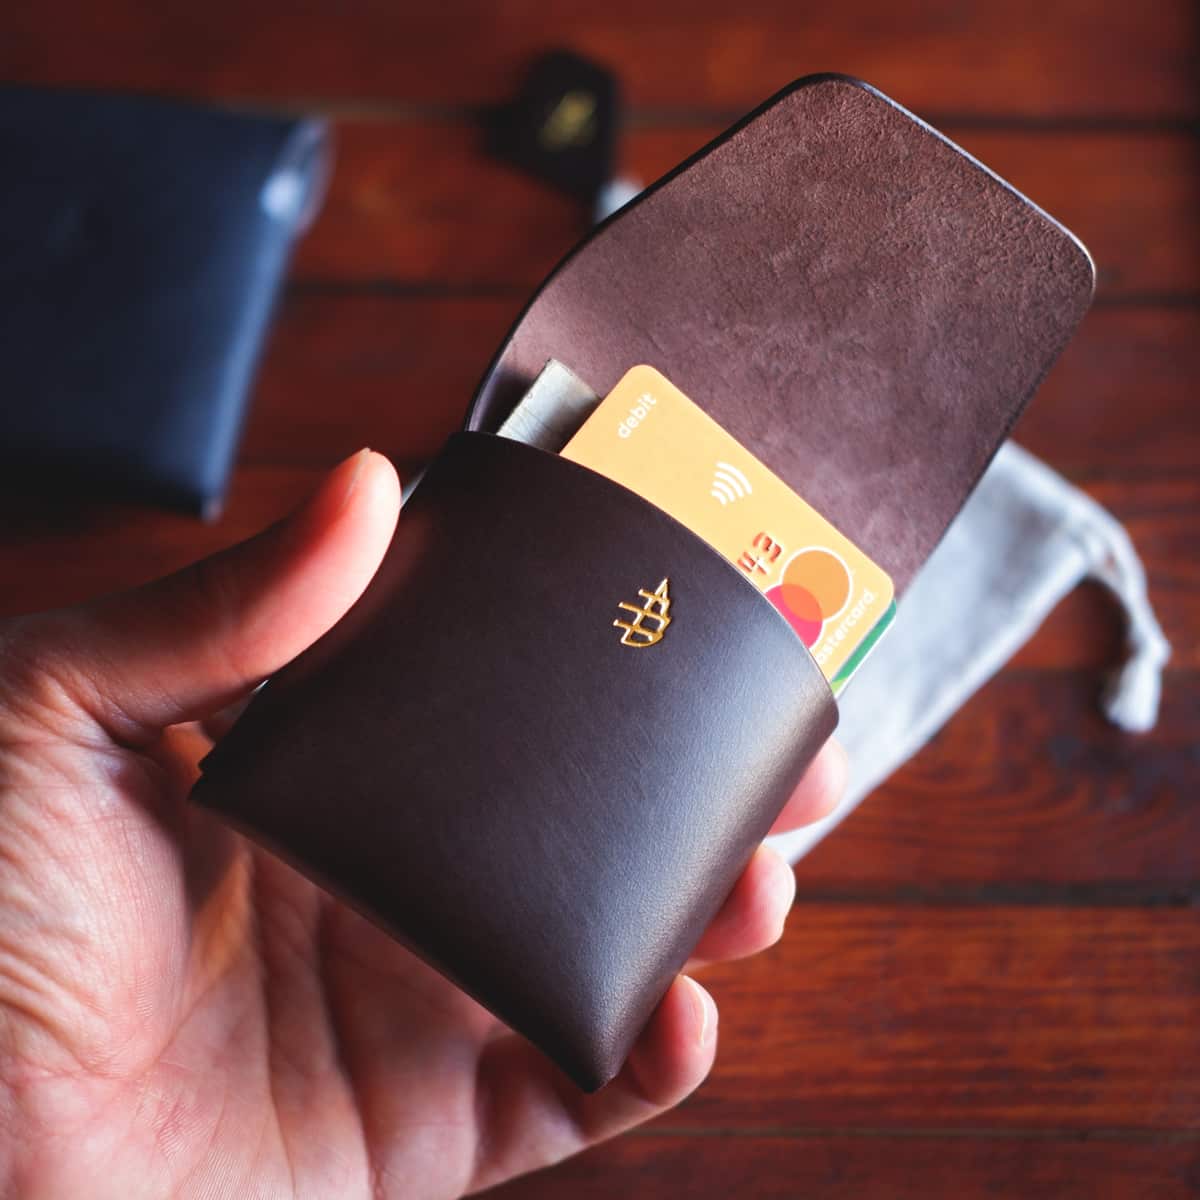 The Lodgepole Stitchless Wallet in Cullata Cavallo leather - interior with cards and cash